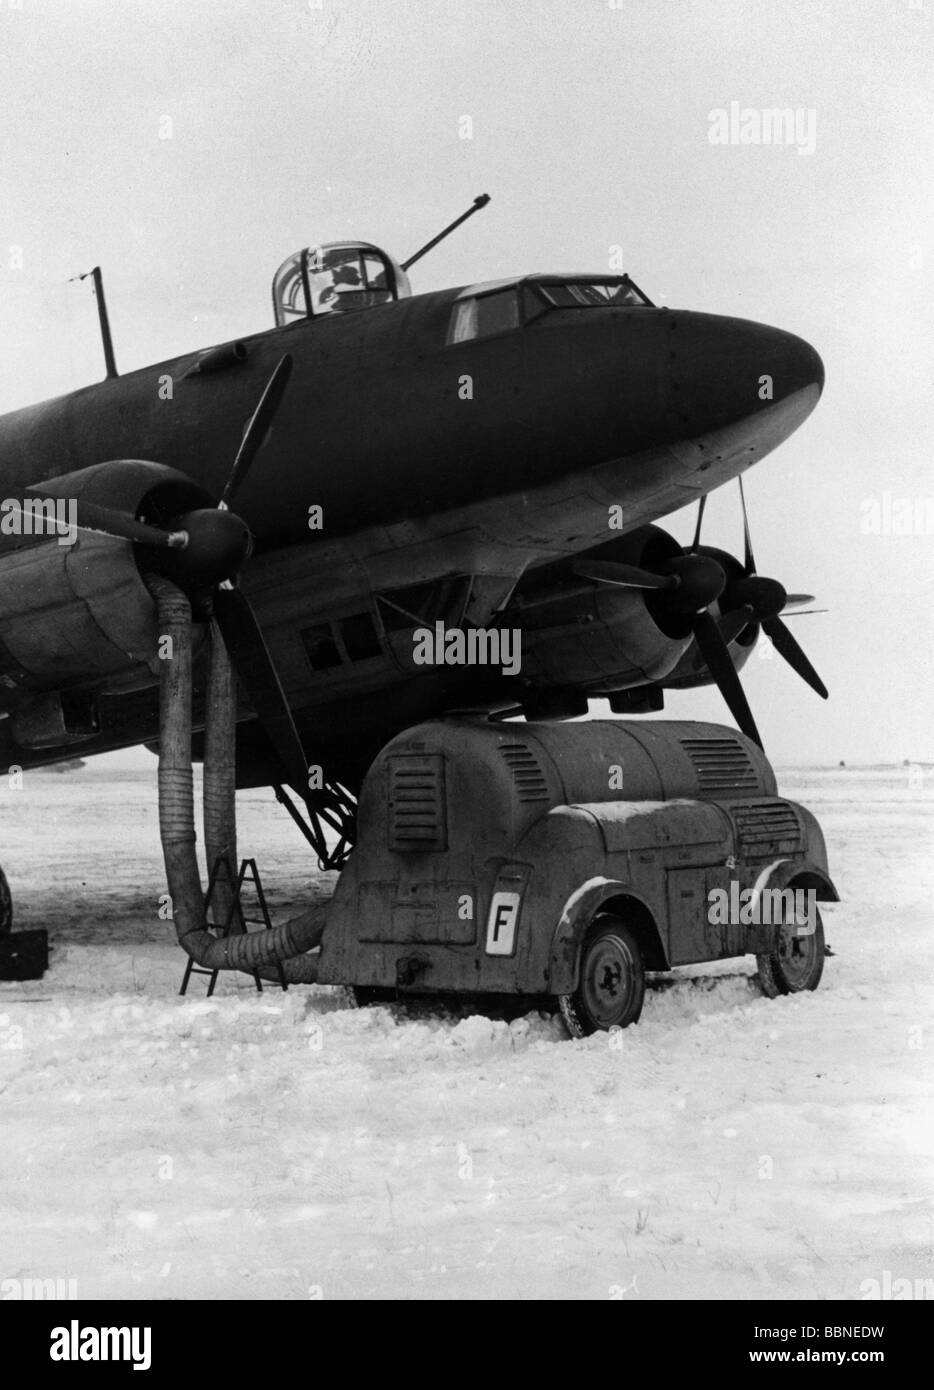 events, Second World War / WWII, aerial warfare, aircraft, German transport and reconnaissance aircraft Focke-Wulf Fw 200 'Condor', Stalino, Ukraine, 11.2.1943, engines are being heated up, Stock Photo